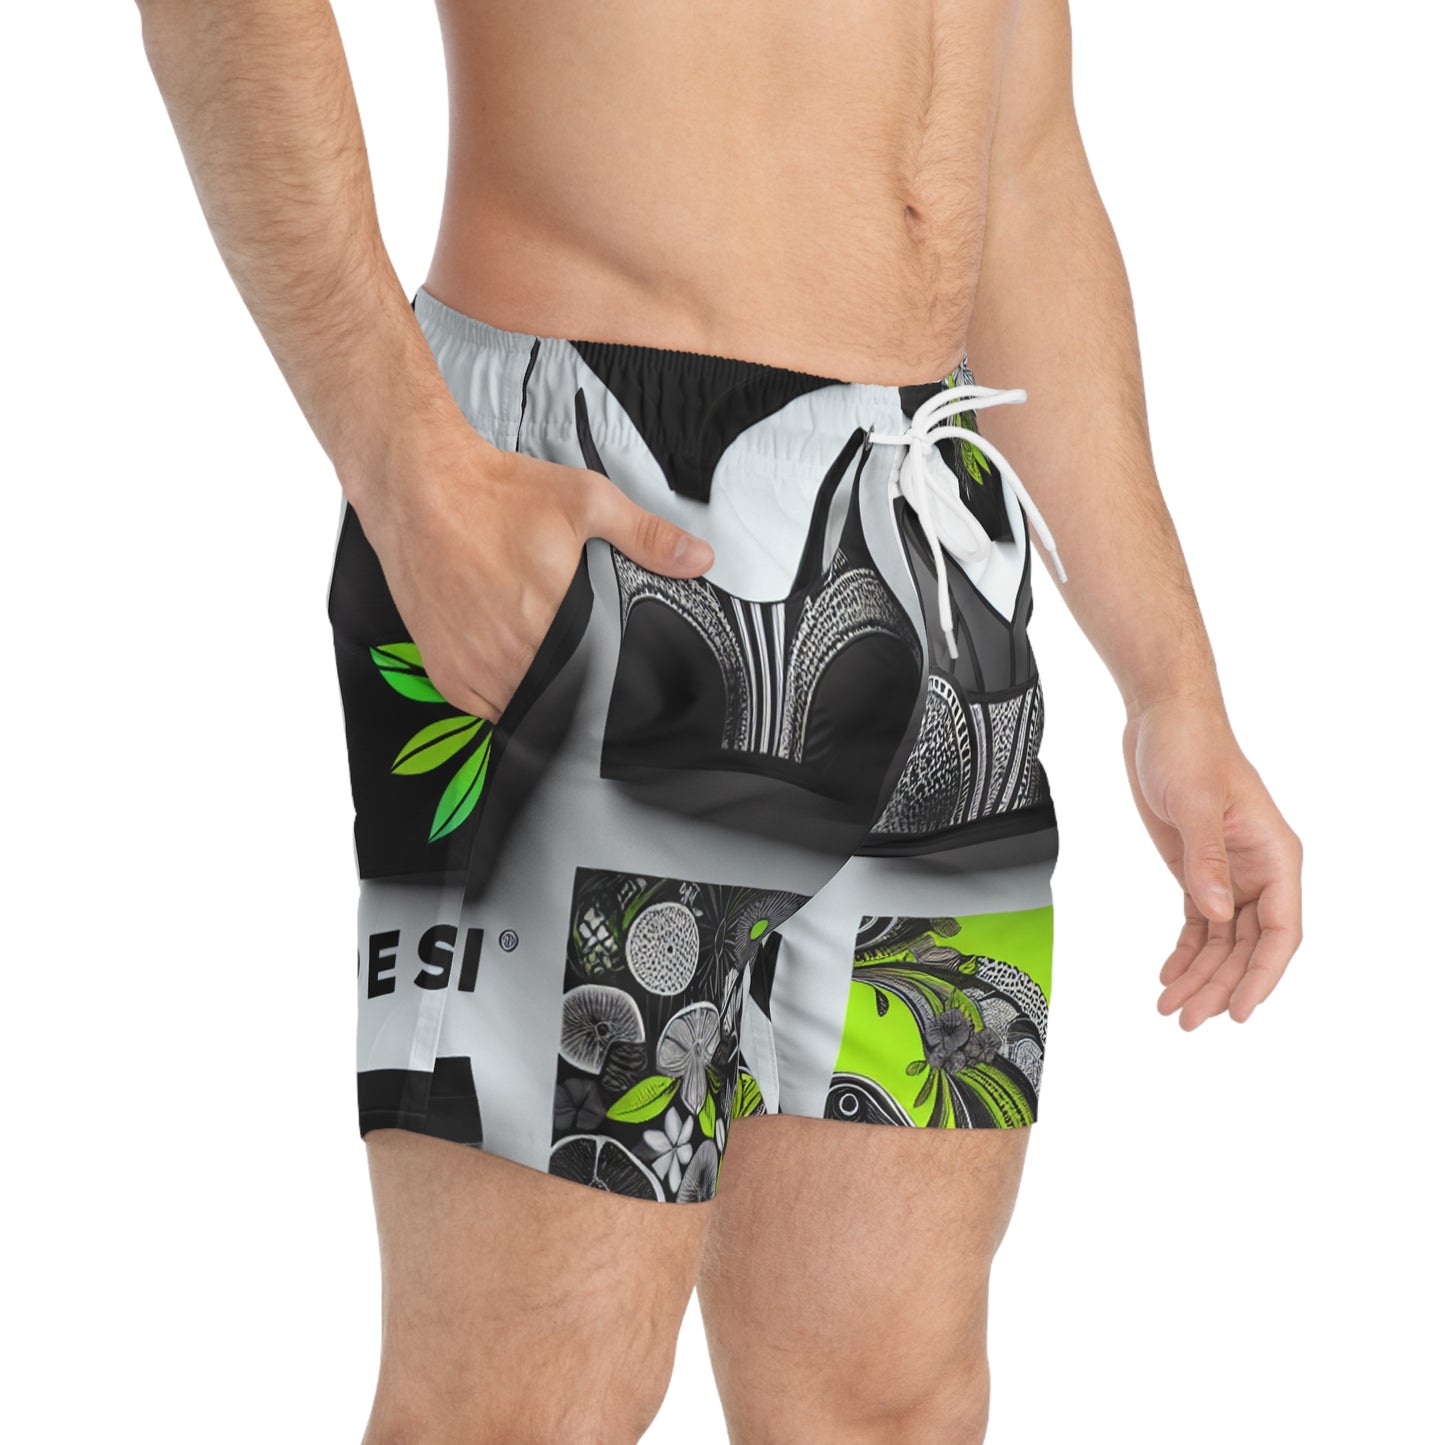 "Immerse yourself in the epitome of stylish comfort with Peskoi swim trunks. Designed to make waves under the sun, our hot - Swim Trunks